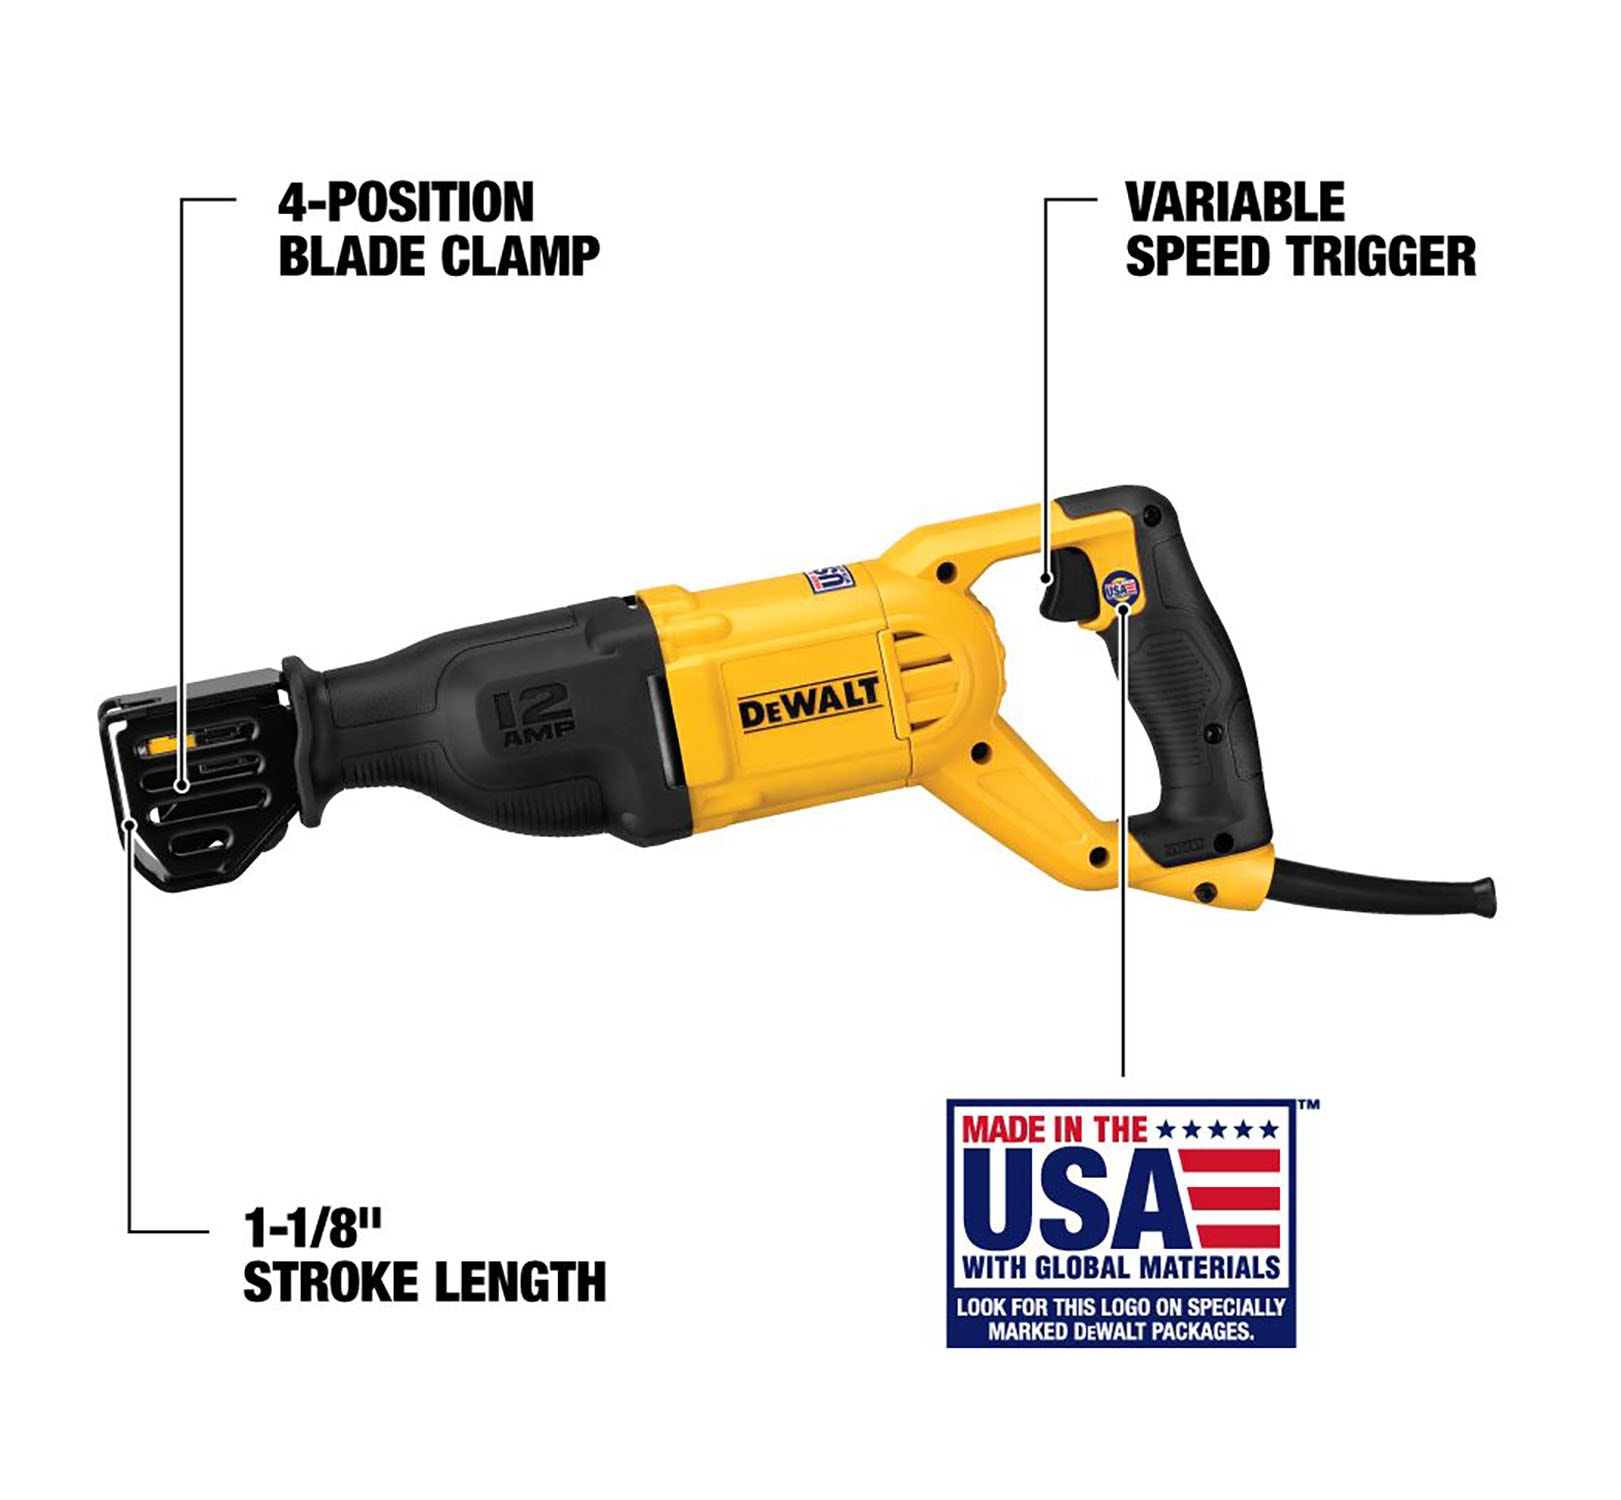 DEWALT 12-Amp Variable Speed Corded Reciprocating Saw in the